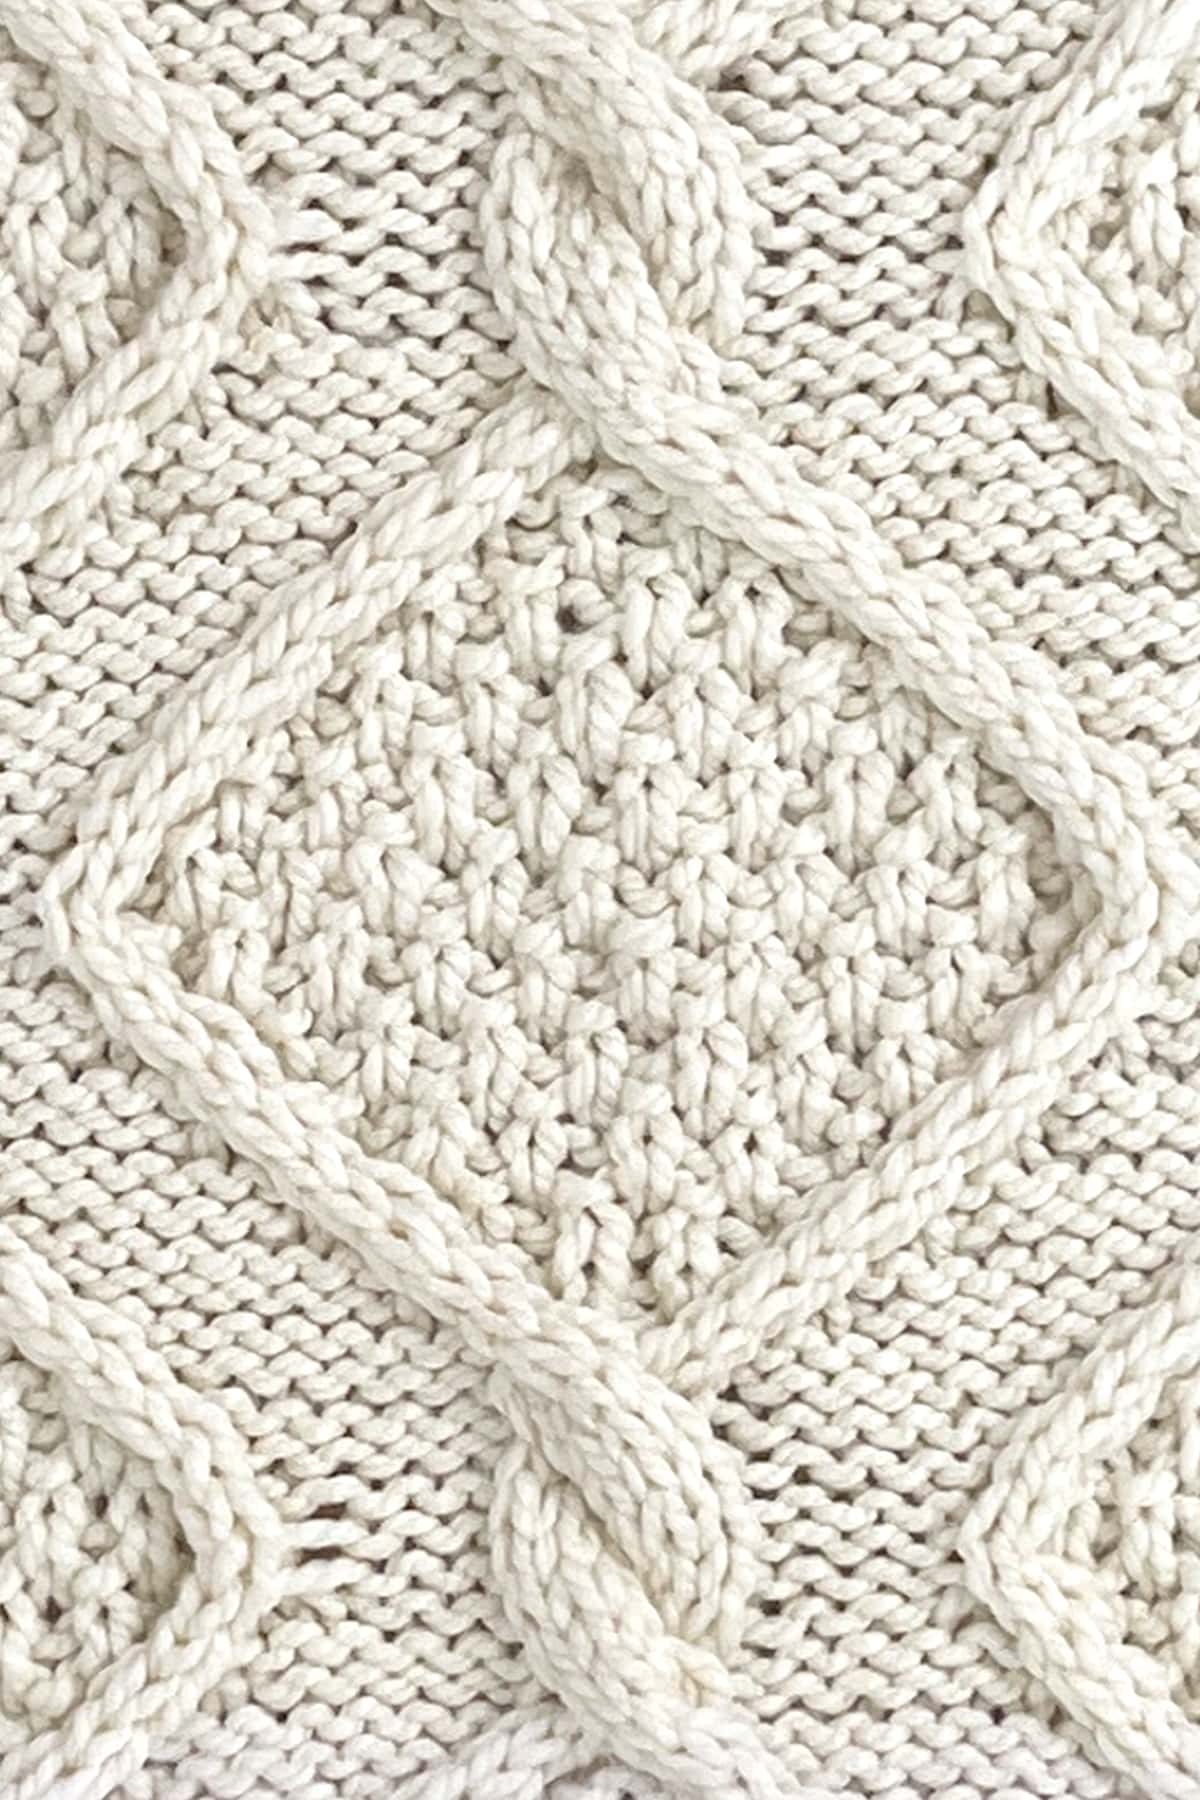 Diamond cable with double moss stitch pattern inside with rope twists atop a reverse stockinette background.